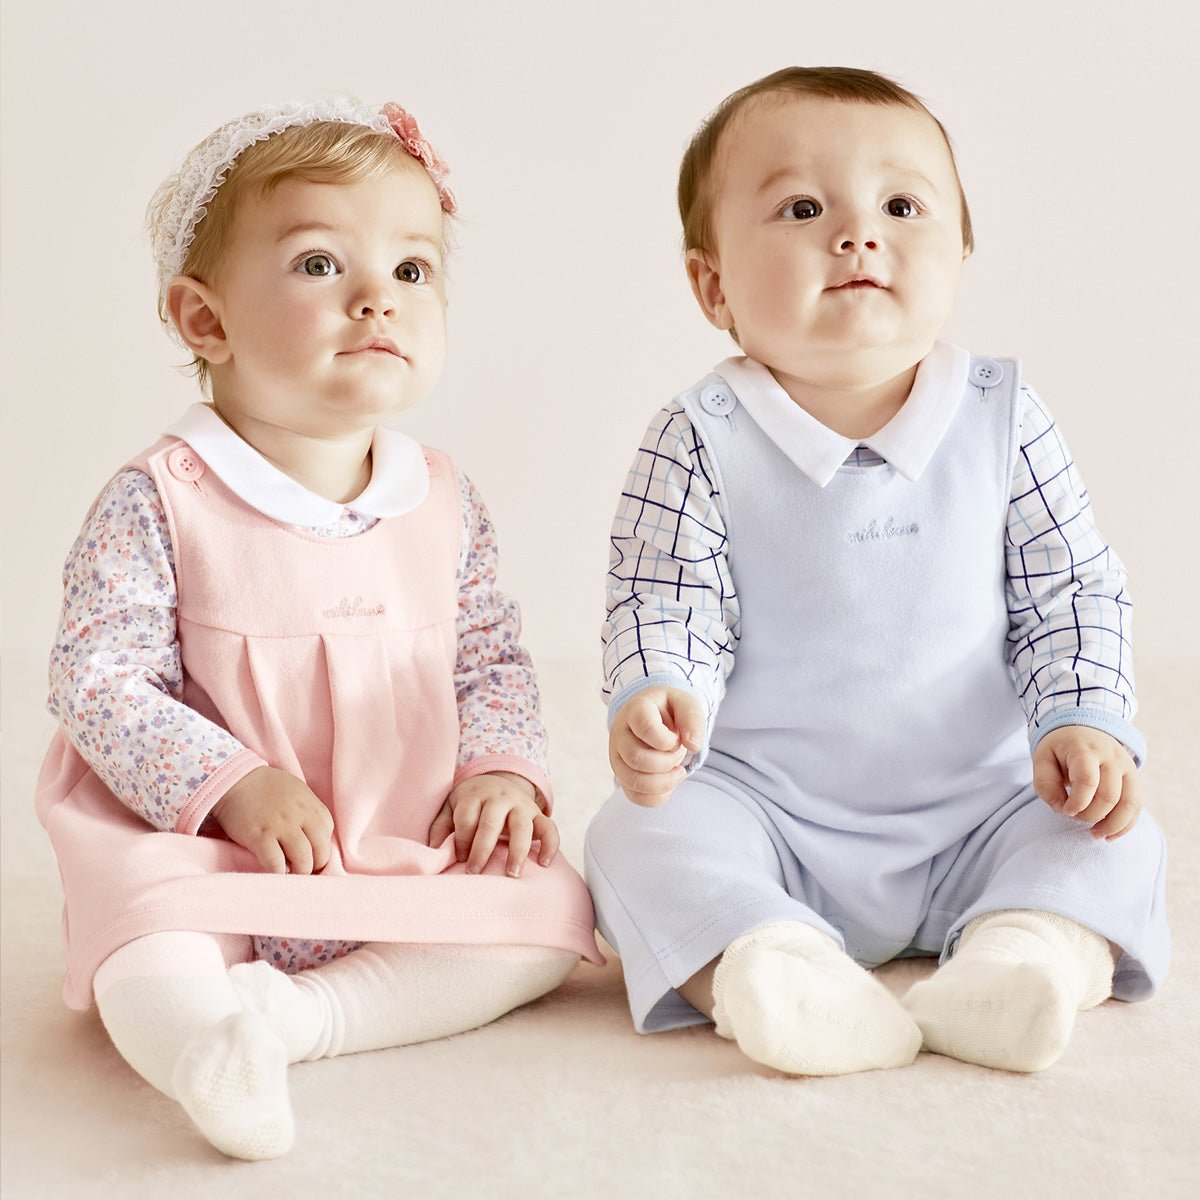 Buy Customized Twin Clothing | Best Twin Baby Gifts | KNITROOT